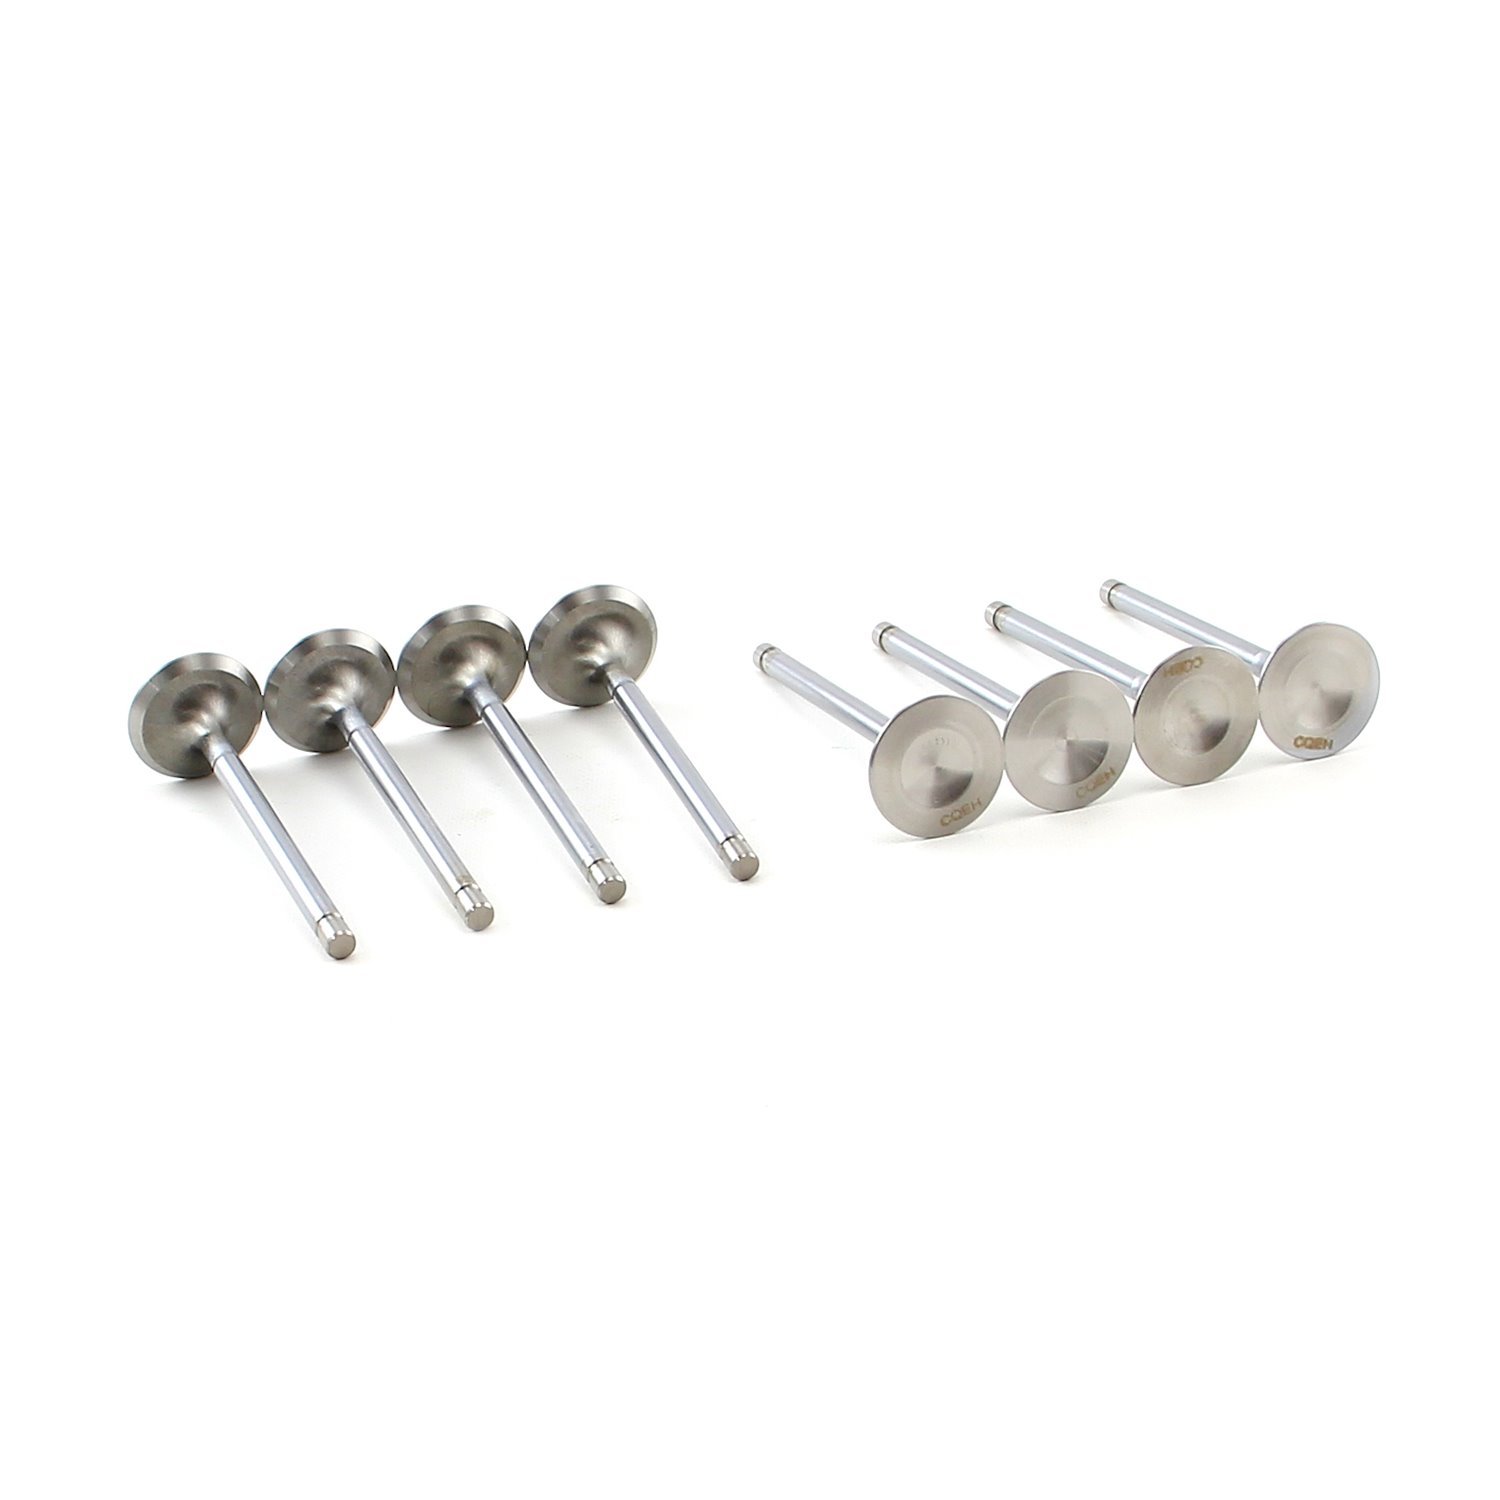 Chevy LS1 LS6 1.620 +Std 8mm Stainless Steel Exhaust Valves Set 8Pcs